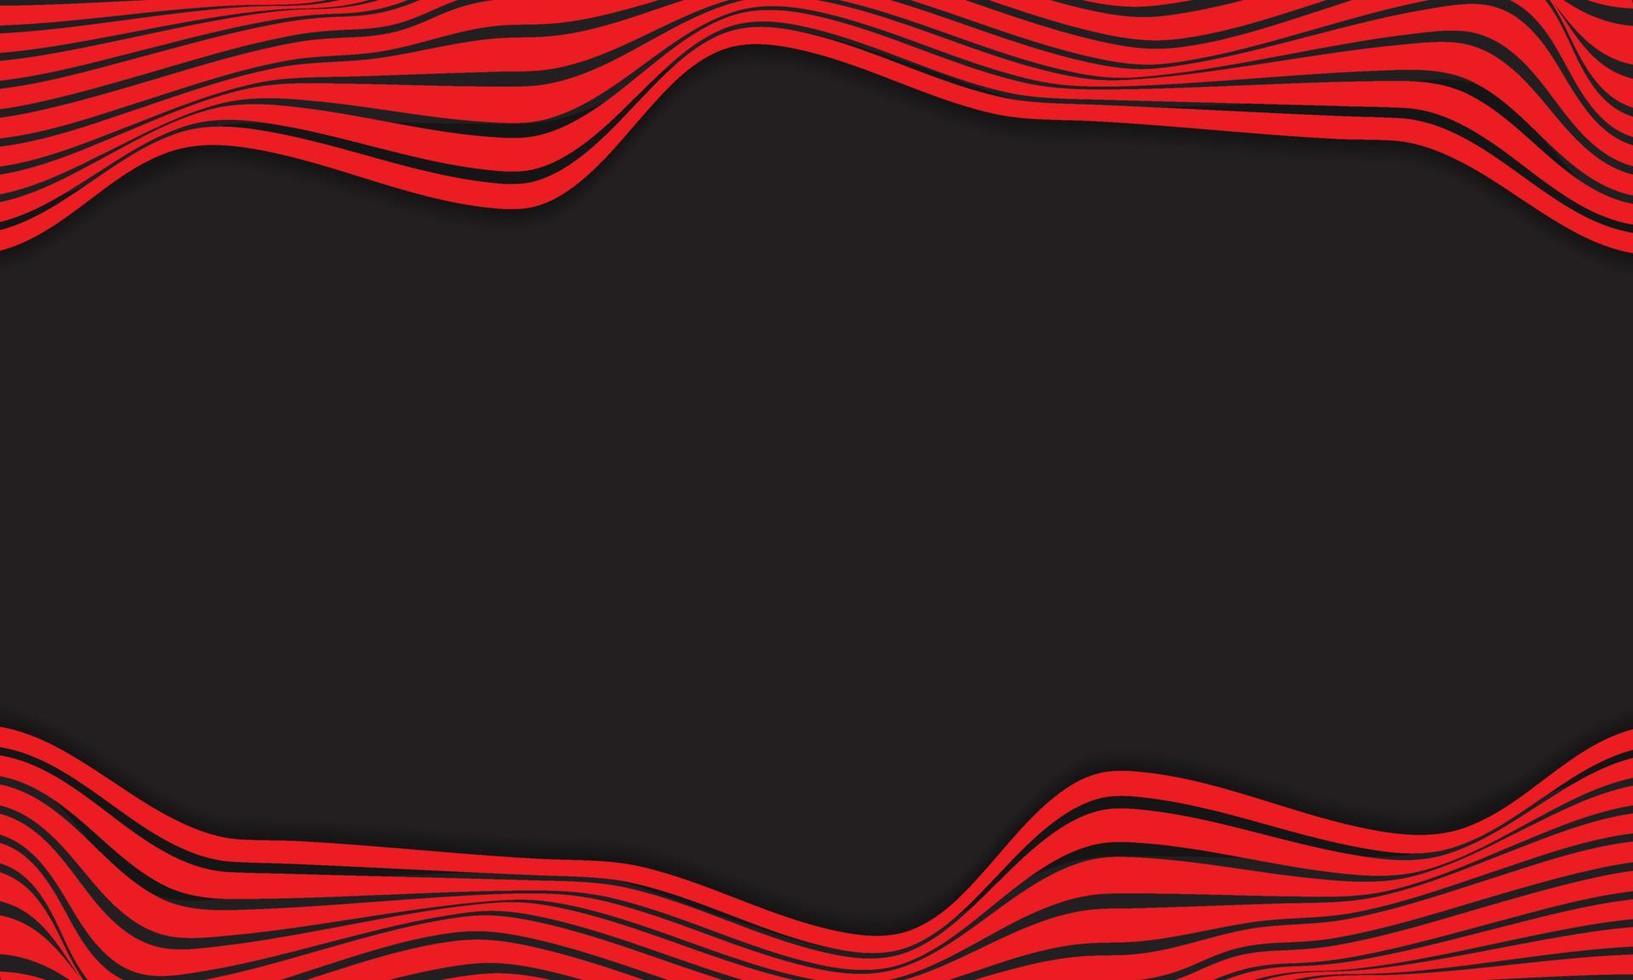 Abstract Stripe Background In Black And Red With Wavy Lines Pattern. vector